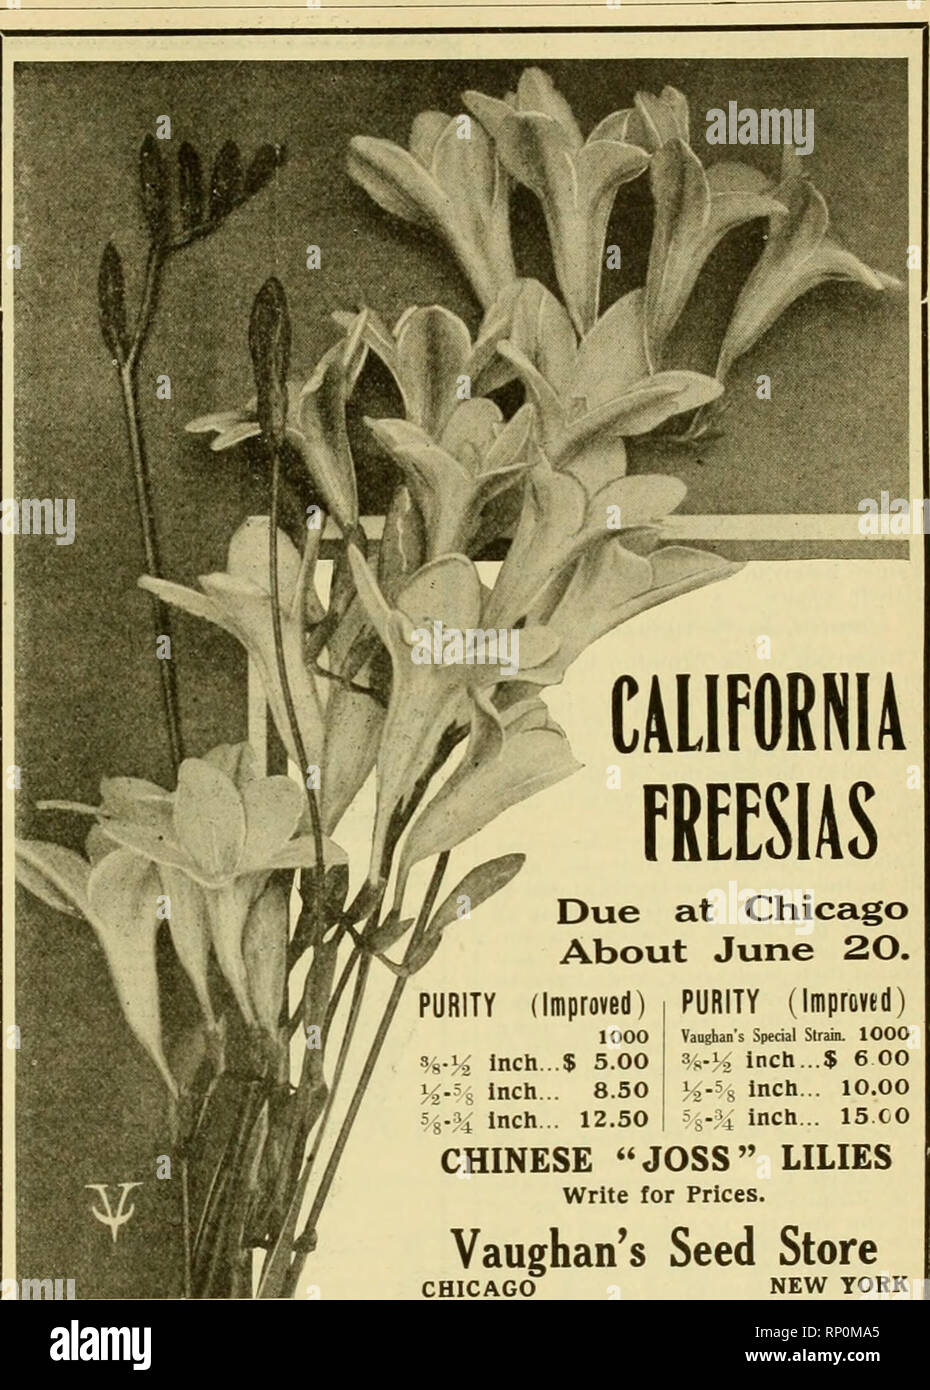 . The American florist : a weekly journal for the trade. Floriculture; Florists. 1919. The American Florist. 1075 DELPHINIM Belladonna S^-in. pots, 10.000 plants ready now. $7.00 per 100; $55.00 per 1000. ENGLISH IVY Extra long AX(^ b^jivy 6-inch pots. $60.00 Extru lung and heavy 5-inch pot3 40.00 Extra long and heavy 4-inch pots 25.00 Lighter grade 4 inch pots IC.OO VIOLETS Rooted runners. May delivery. Princess of Wales lou, $4.00; lOOO, $30.oo Lady Campbell 100, 4.00; lOOO, 30.00 C. U. LIGGIT Office: 303 Bulletin Bldg., PHILADELPHIA, - -- PA. have agreed that it is practically im- possible Stock Photo